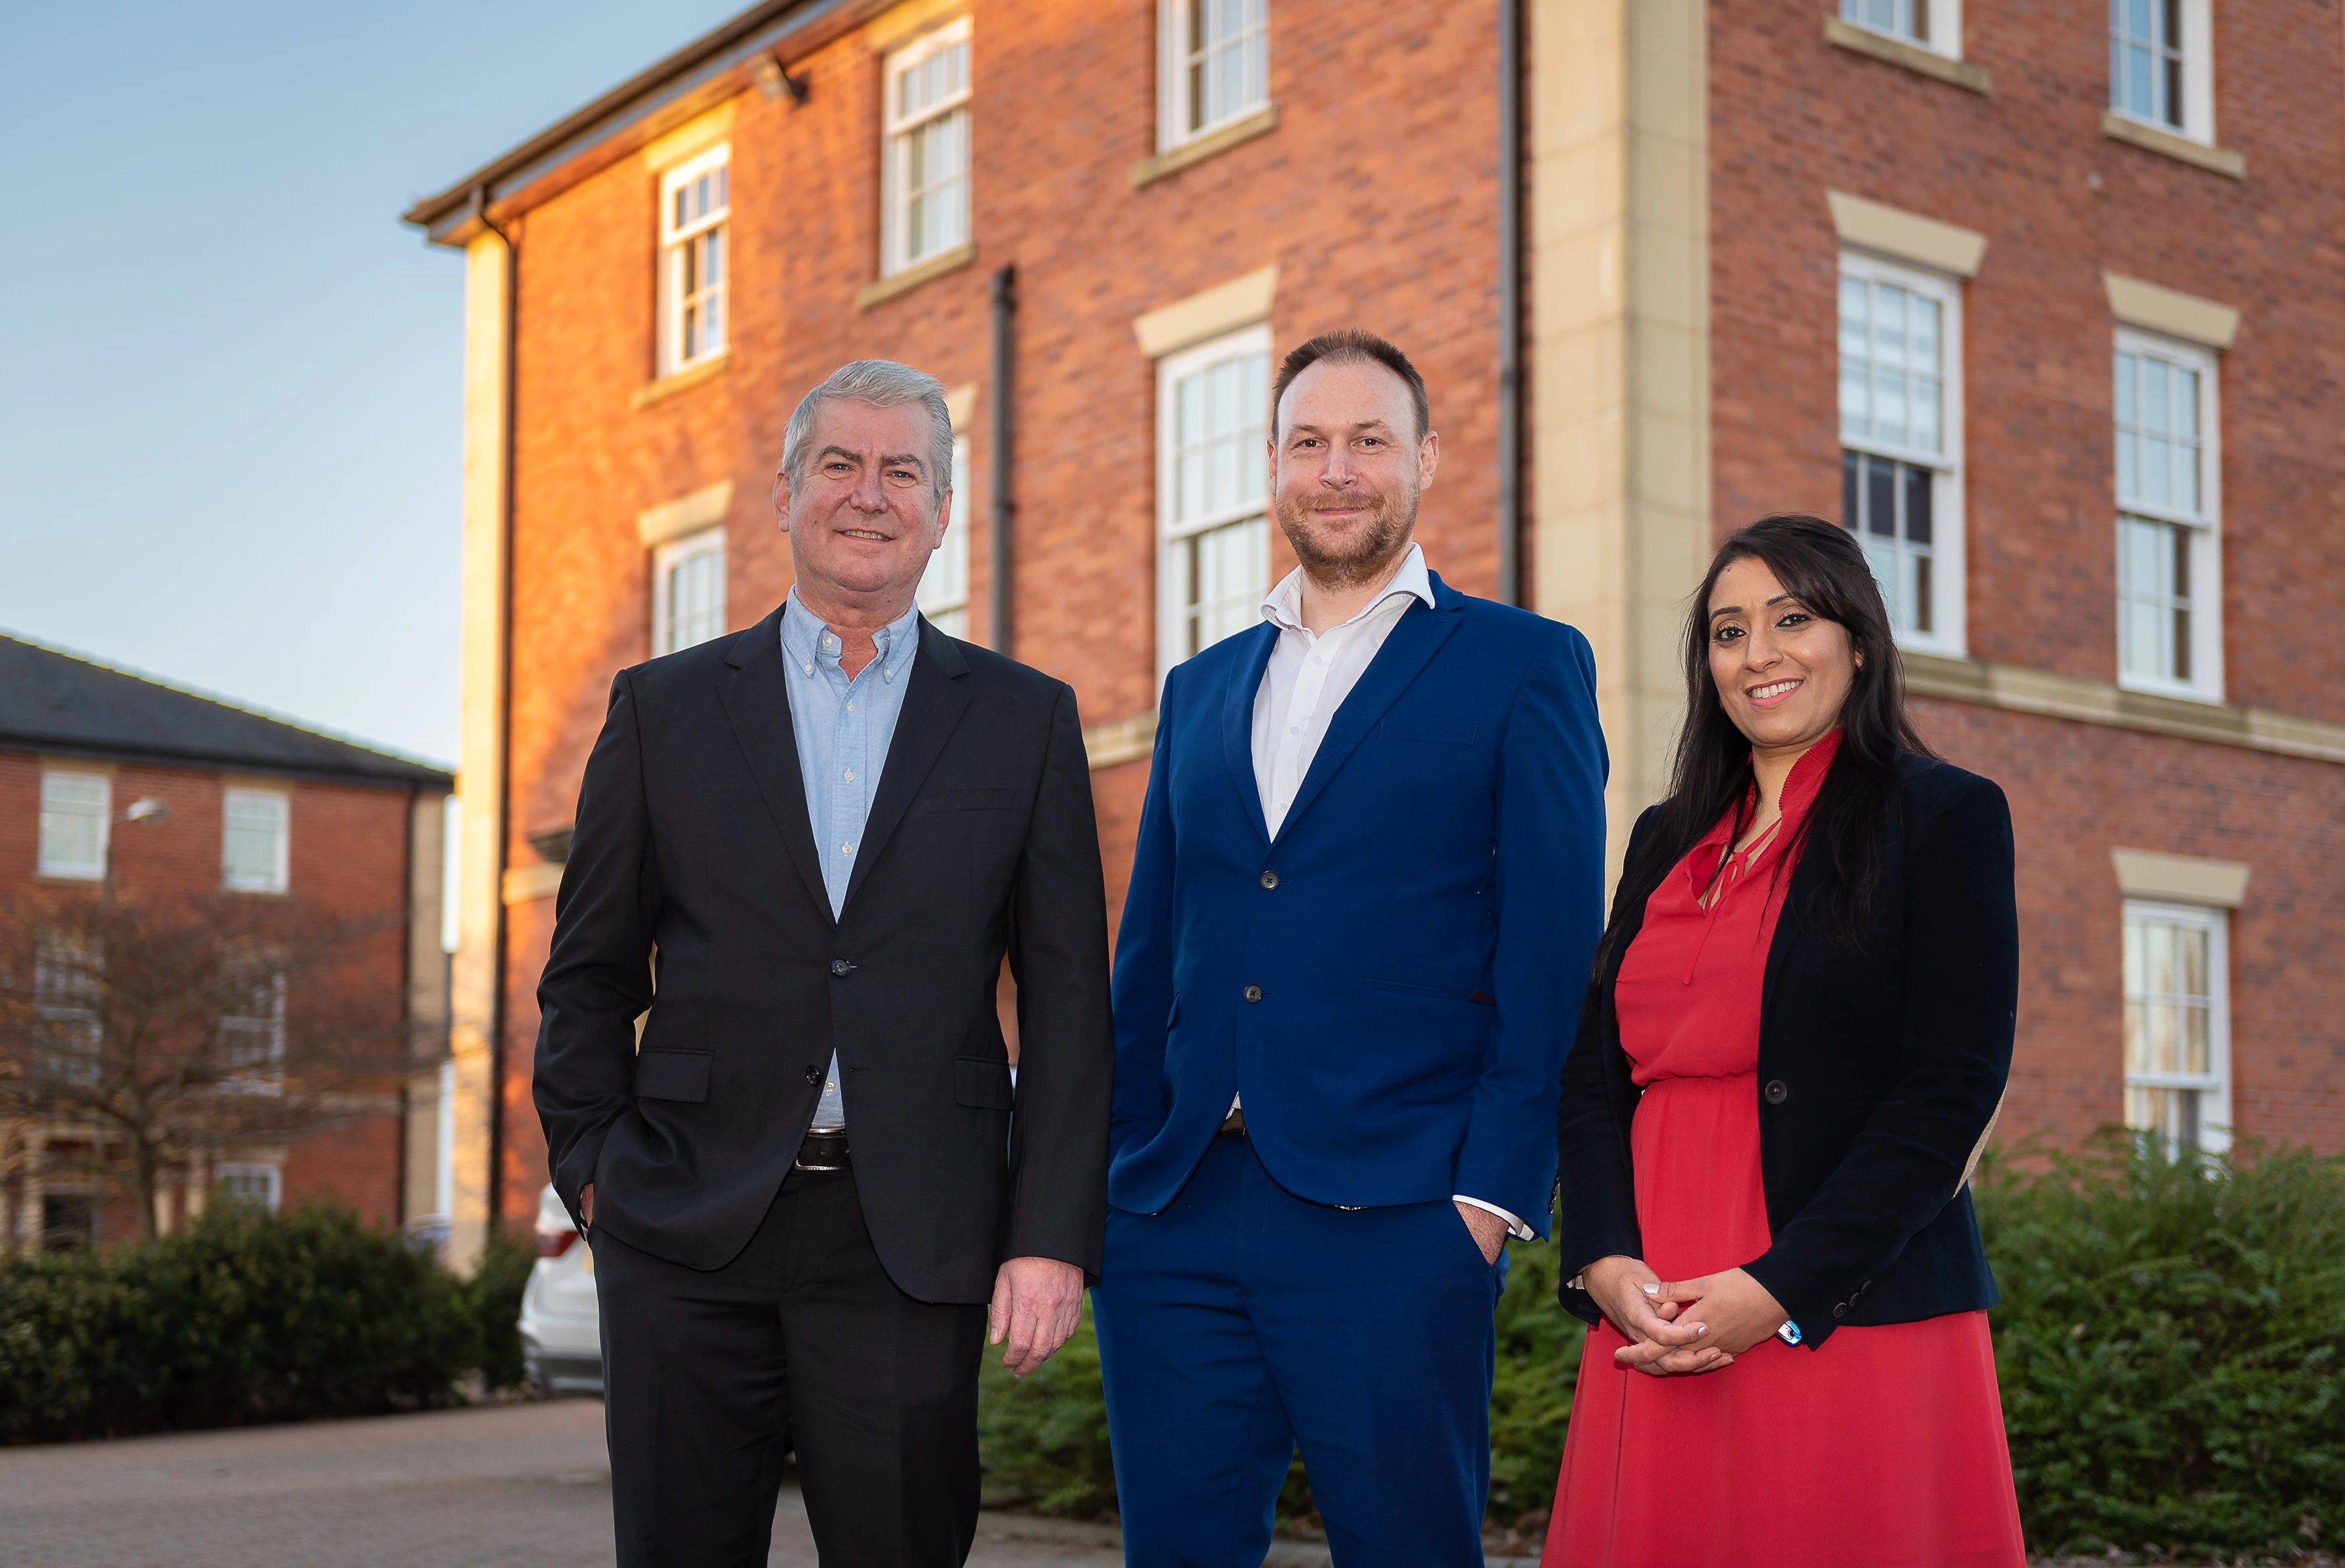 Graham Fenton (left) and Simon Lewsley (middle), directors of ICU, are pictured outside their new premises with Ann Bhatti, head of Connect Derby.